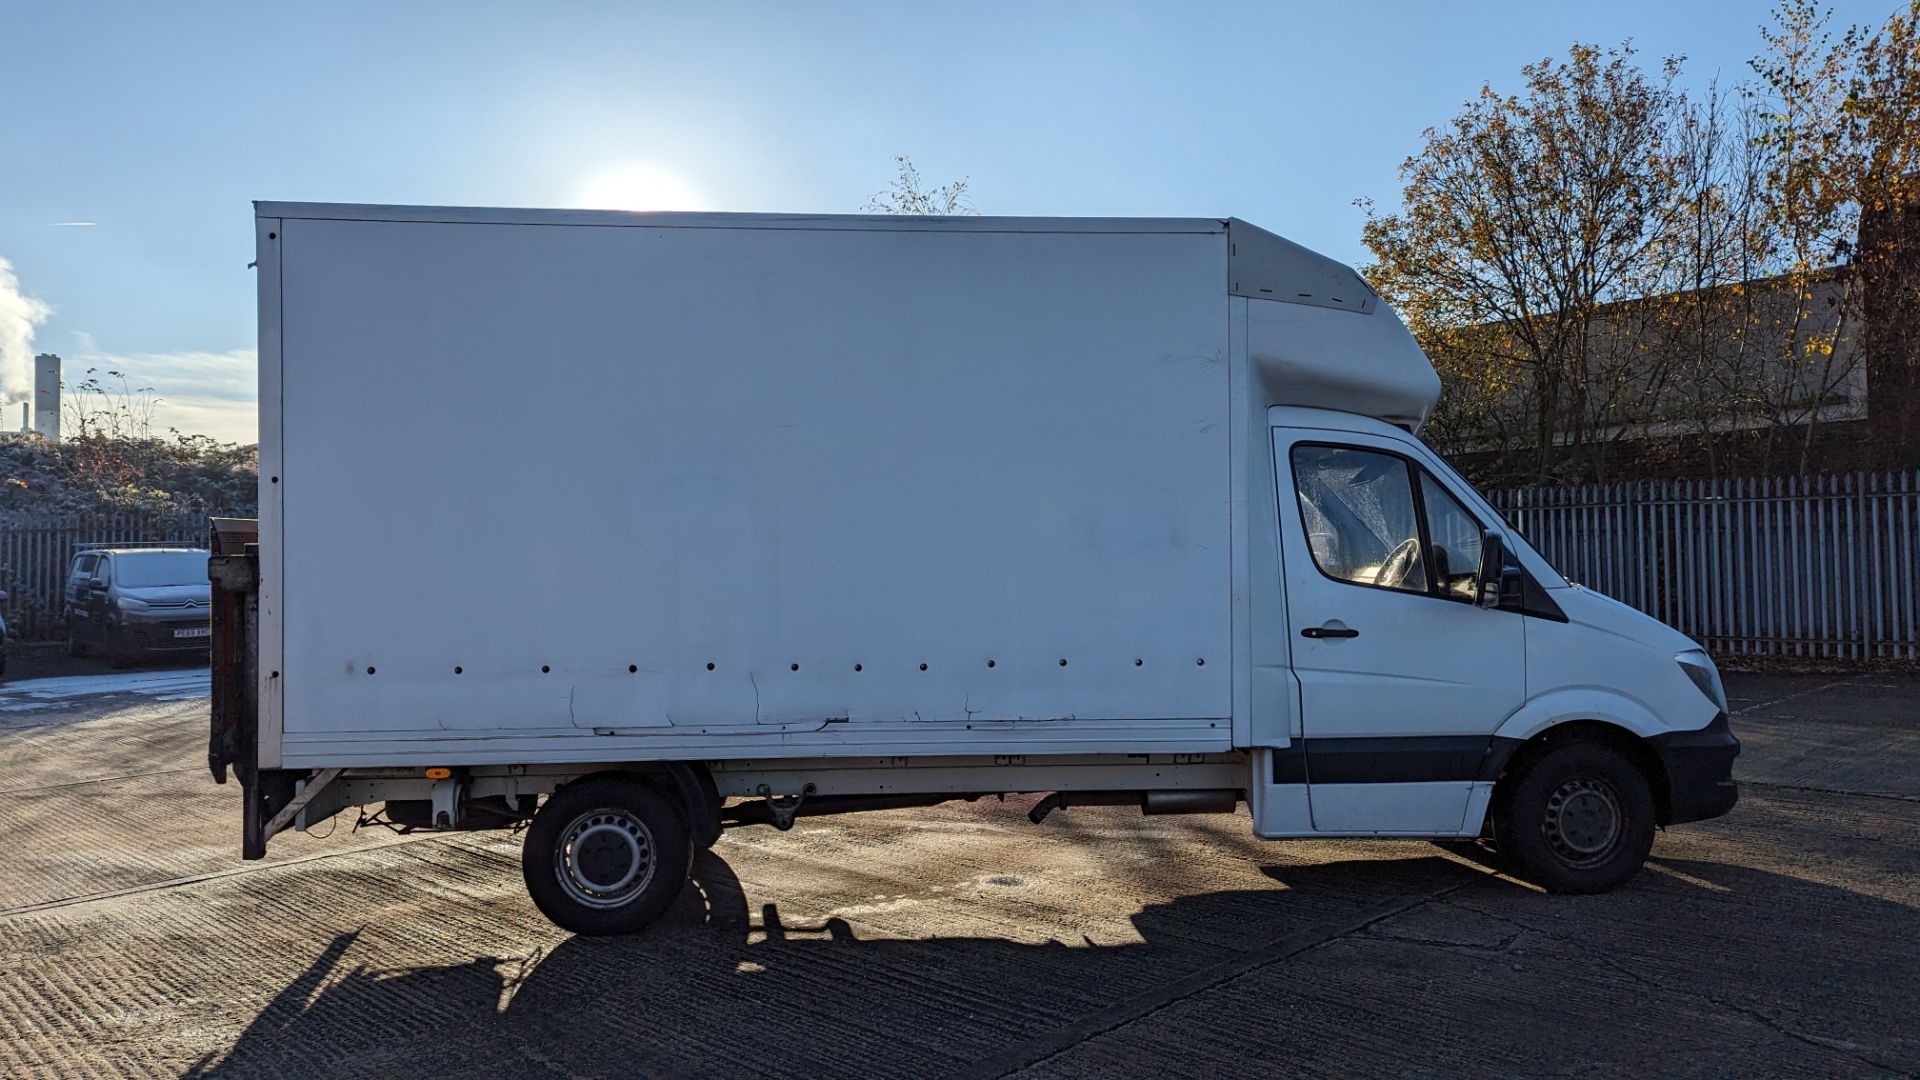 KX65 UDJ, Mercedes Sprinter 313 CDI featuring curtain side on the passenger side and solid side on t - Image 11 of 21